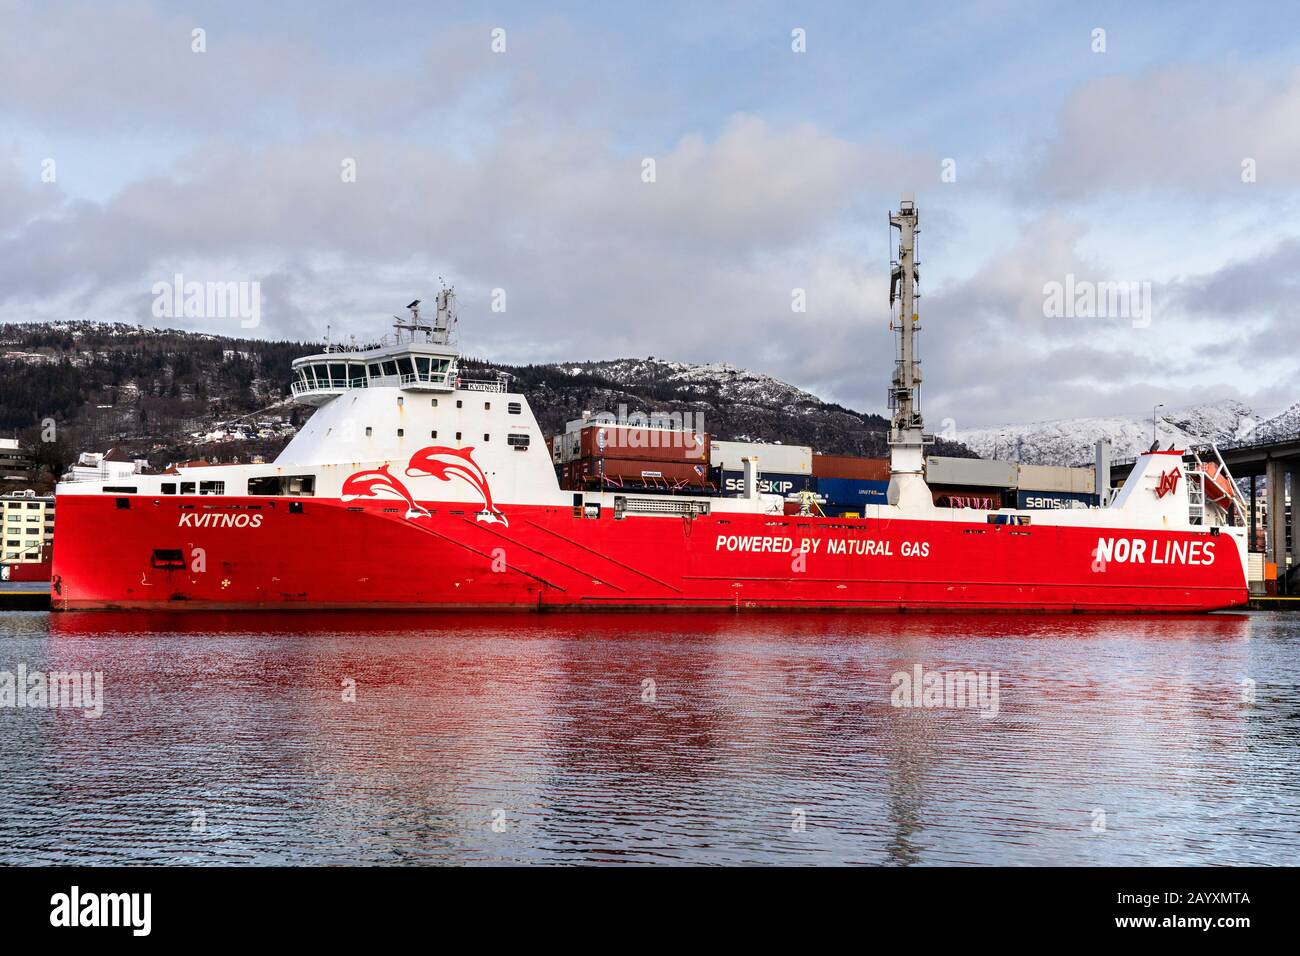 Ro-ro, general cargo and container vessel Kvitnos at work at Frieleneskaien quay in the port of Bergen, Norway.  The vessel is powered by natural gas. Stock Photo